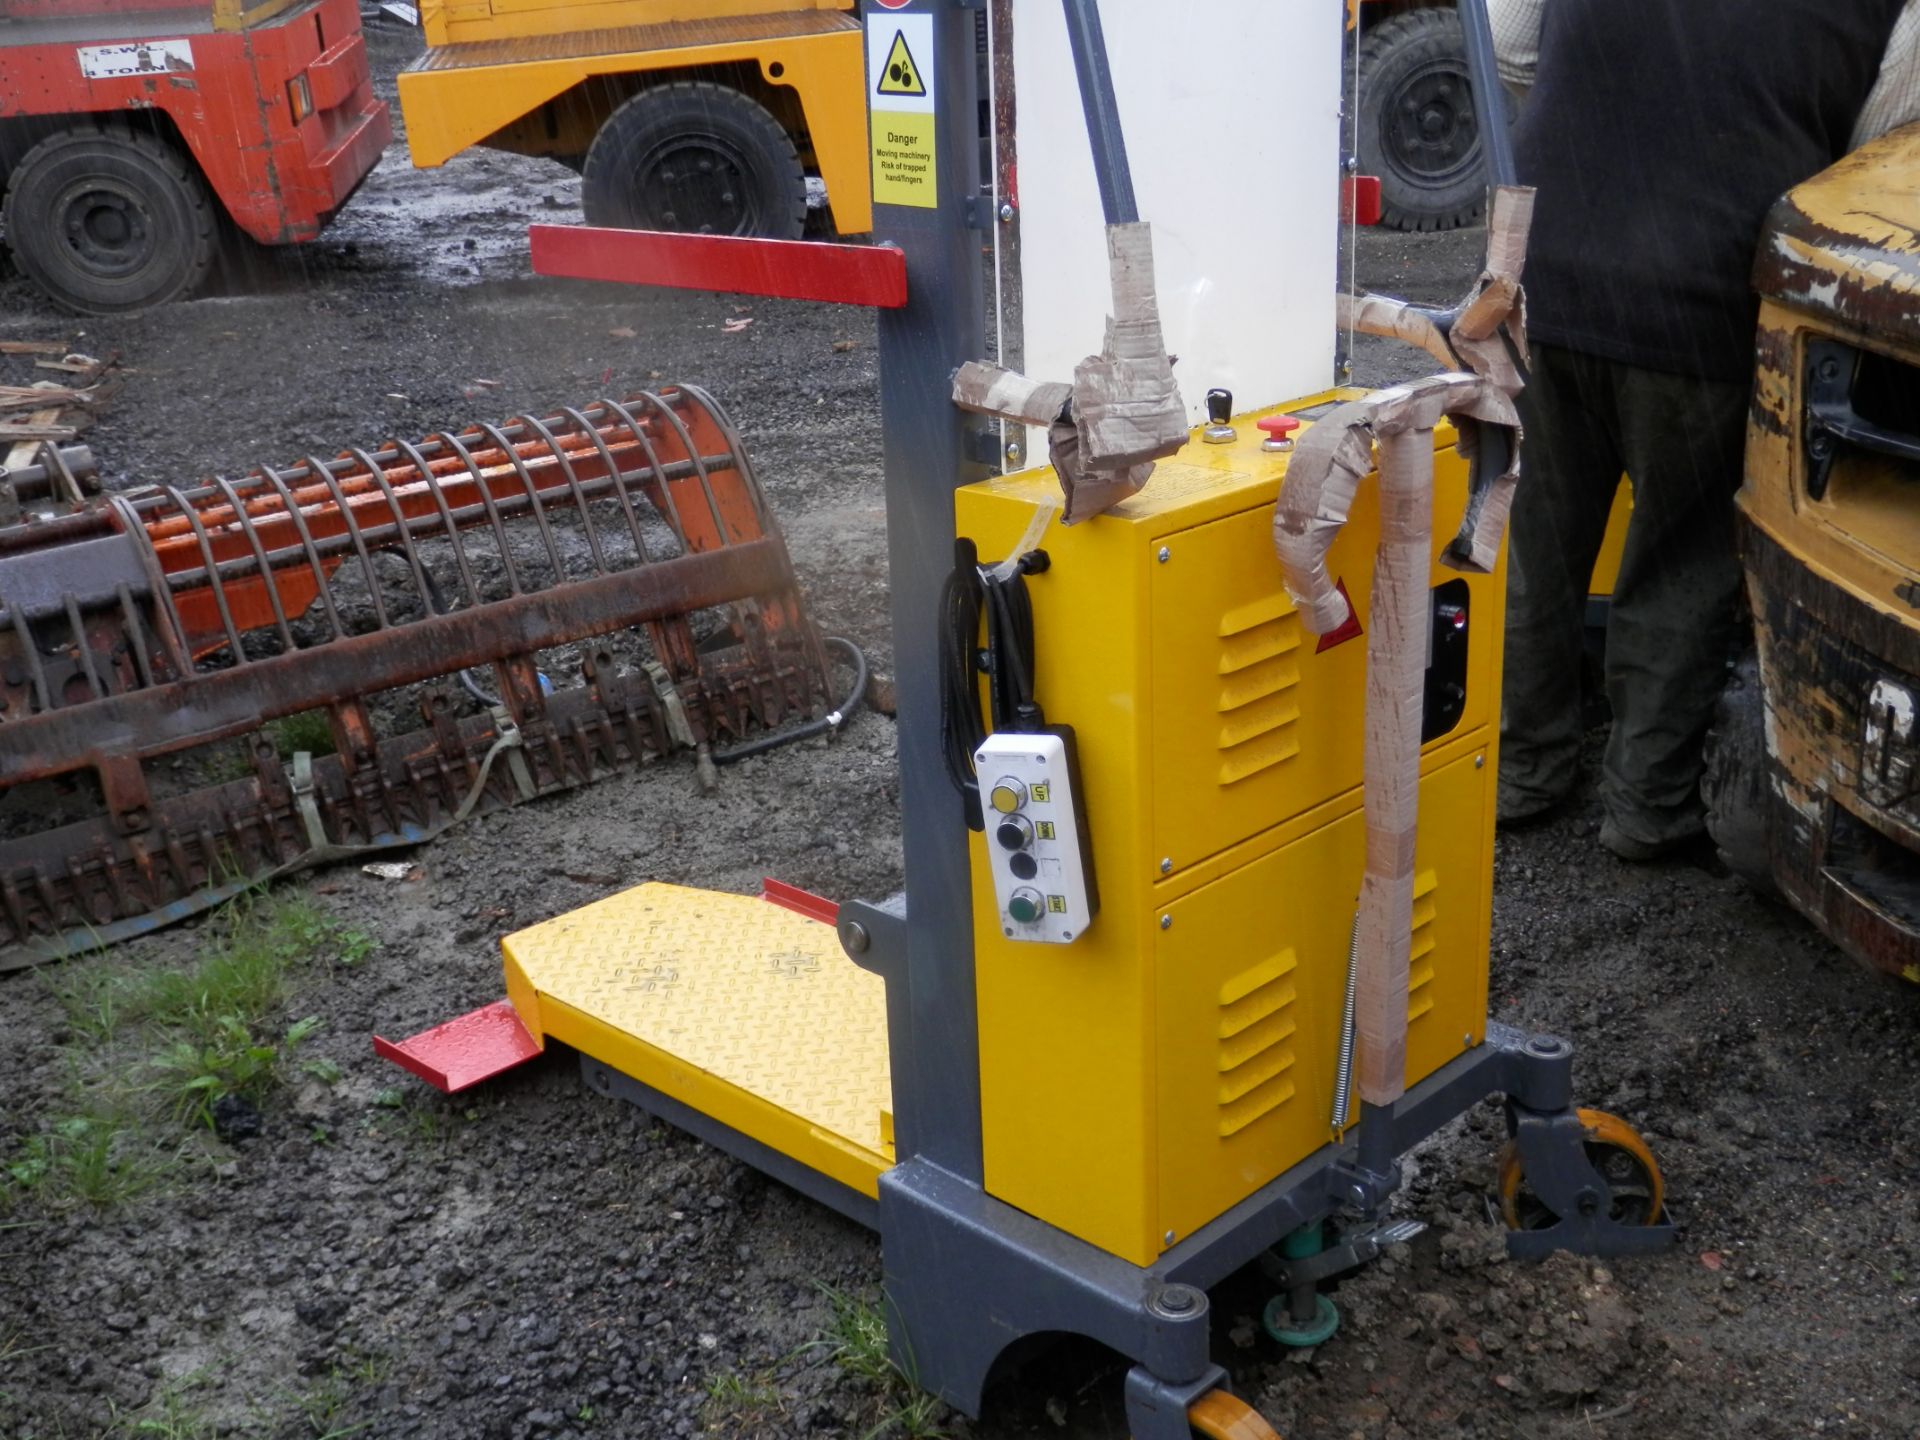 NEW WARRIOR 12V ELECTRIC PALLET TRUCK, 5 AVAILABLE. 250KG LIFT CAPACITY, 1000MM. (2 OF 5) - Image 3 of 5